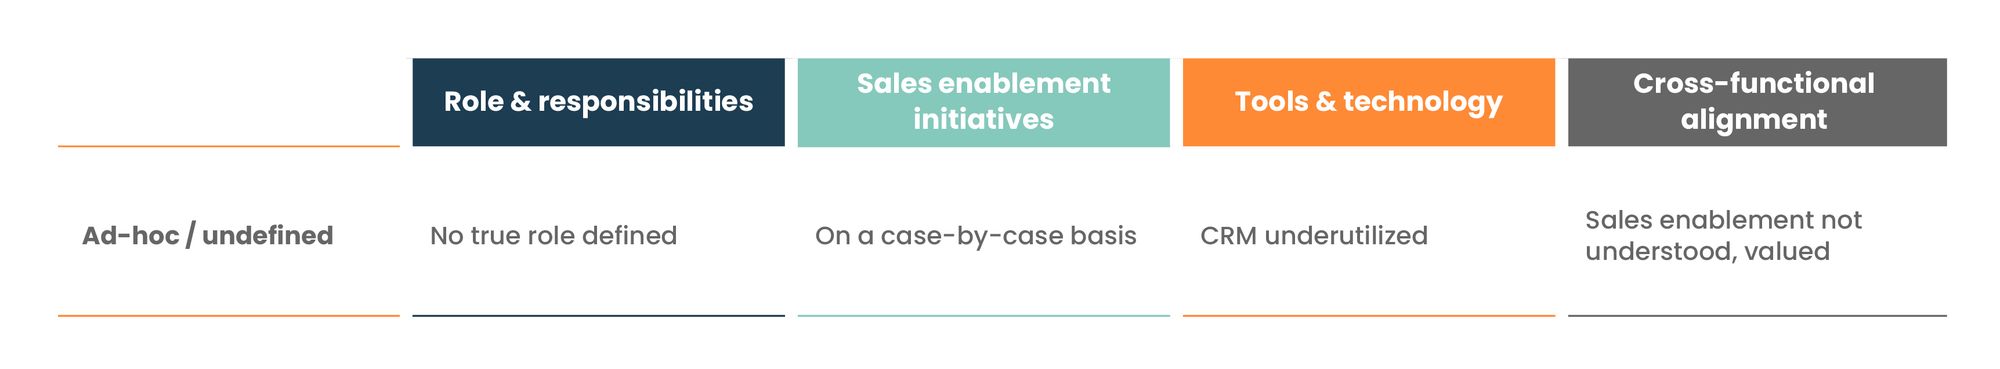 Ad-hoc / undefined sales enablement maturity stage